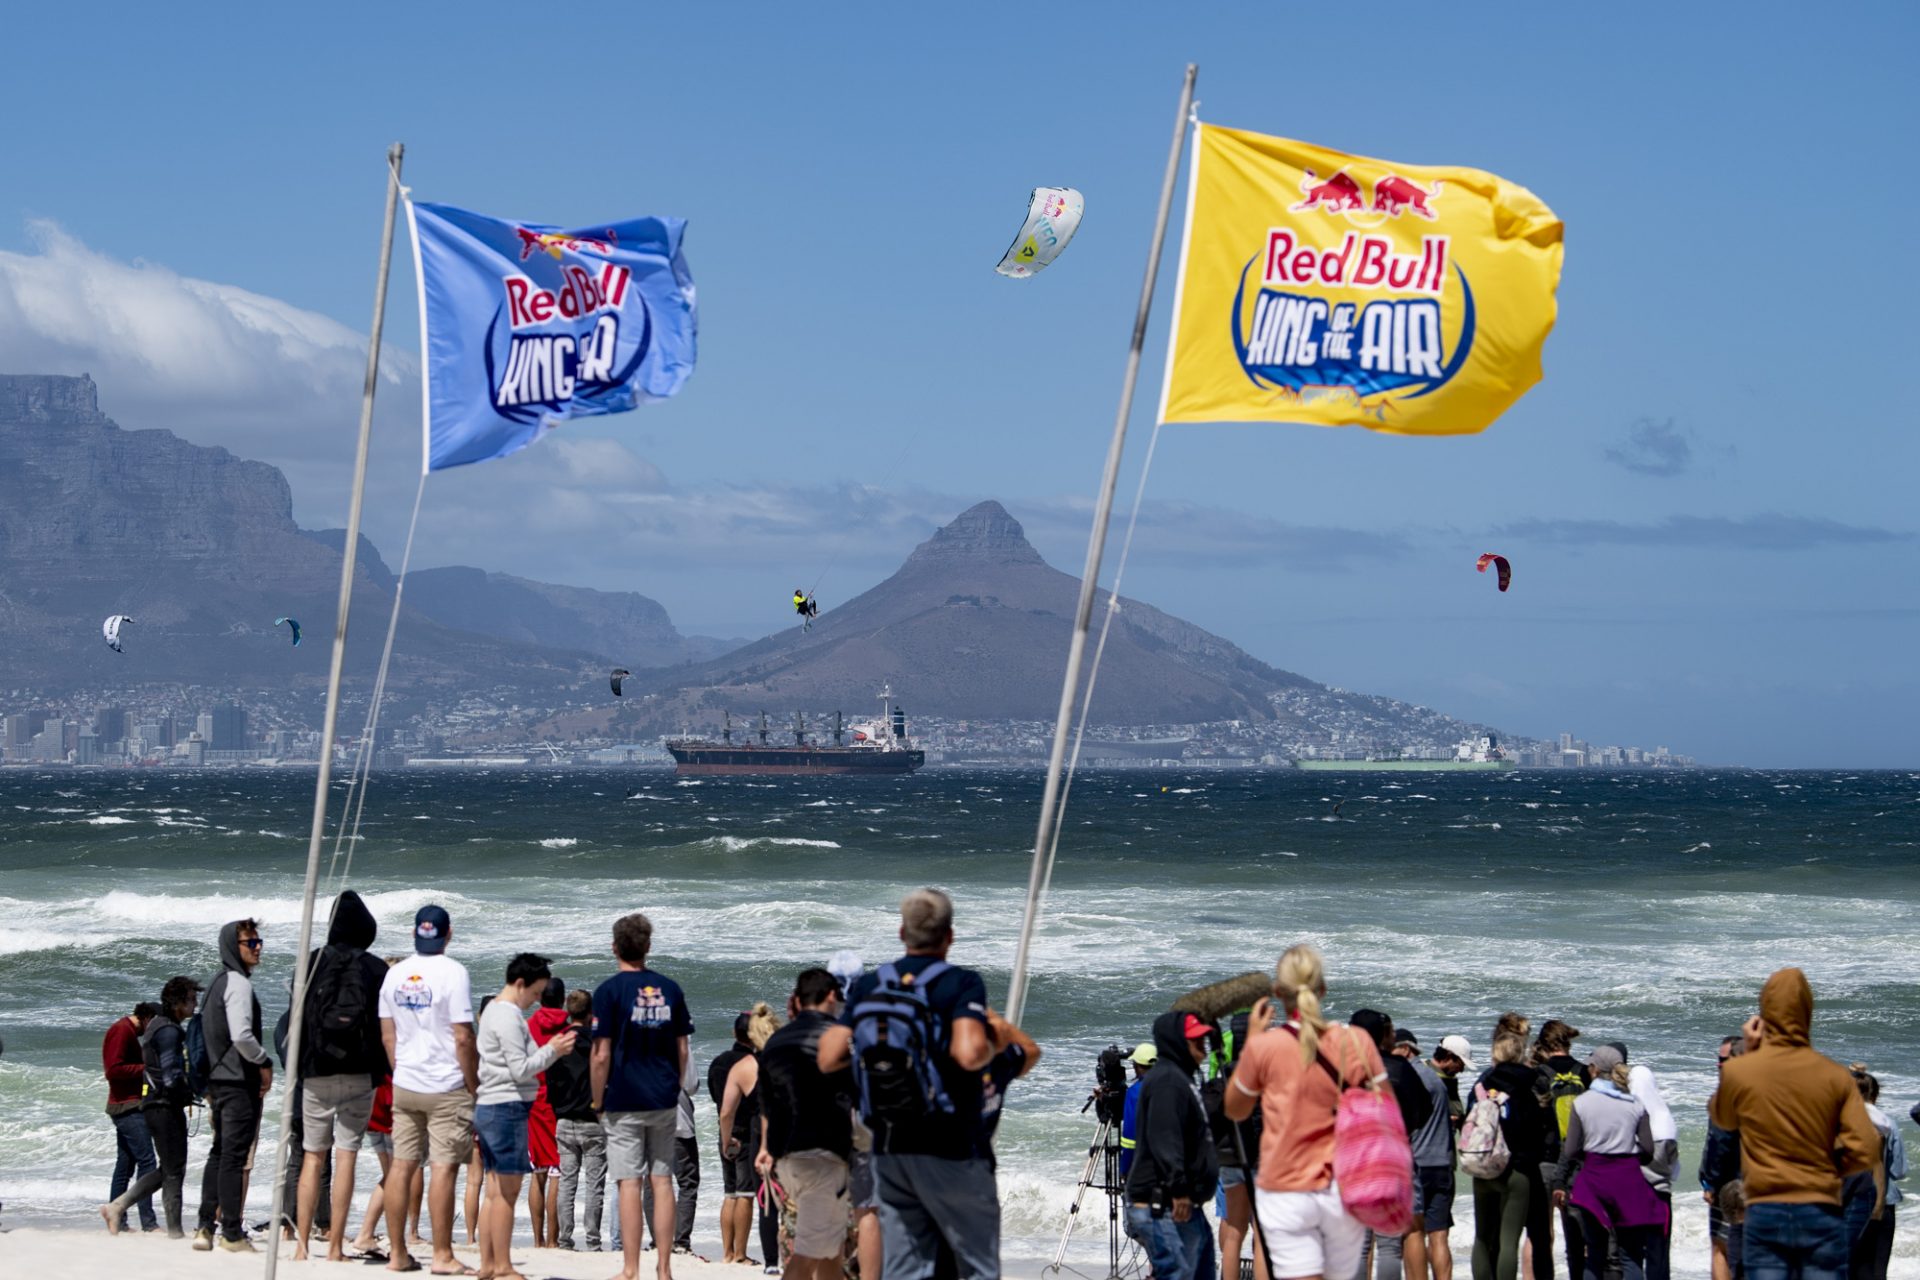 Red Bull King of the Air 2020 | The Highlights | Features | Kitesurfing Magazine Online IKSURFMAG